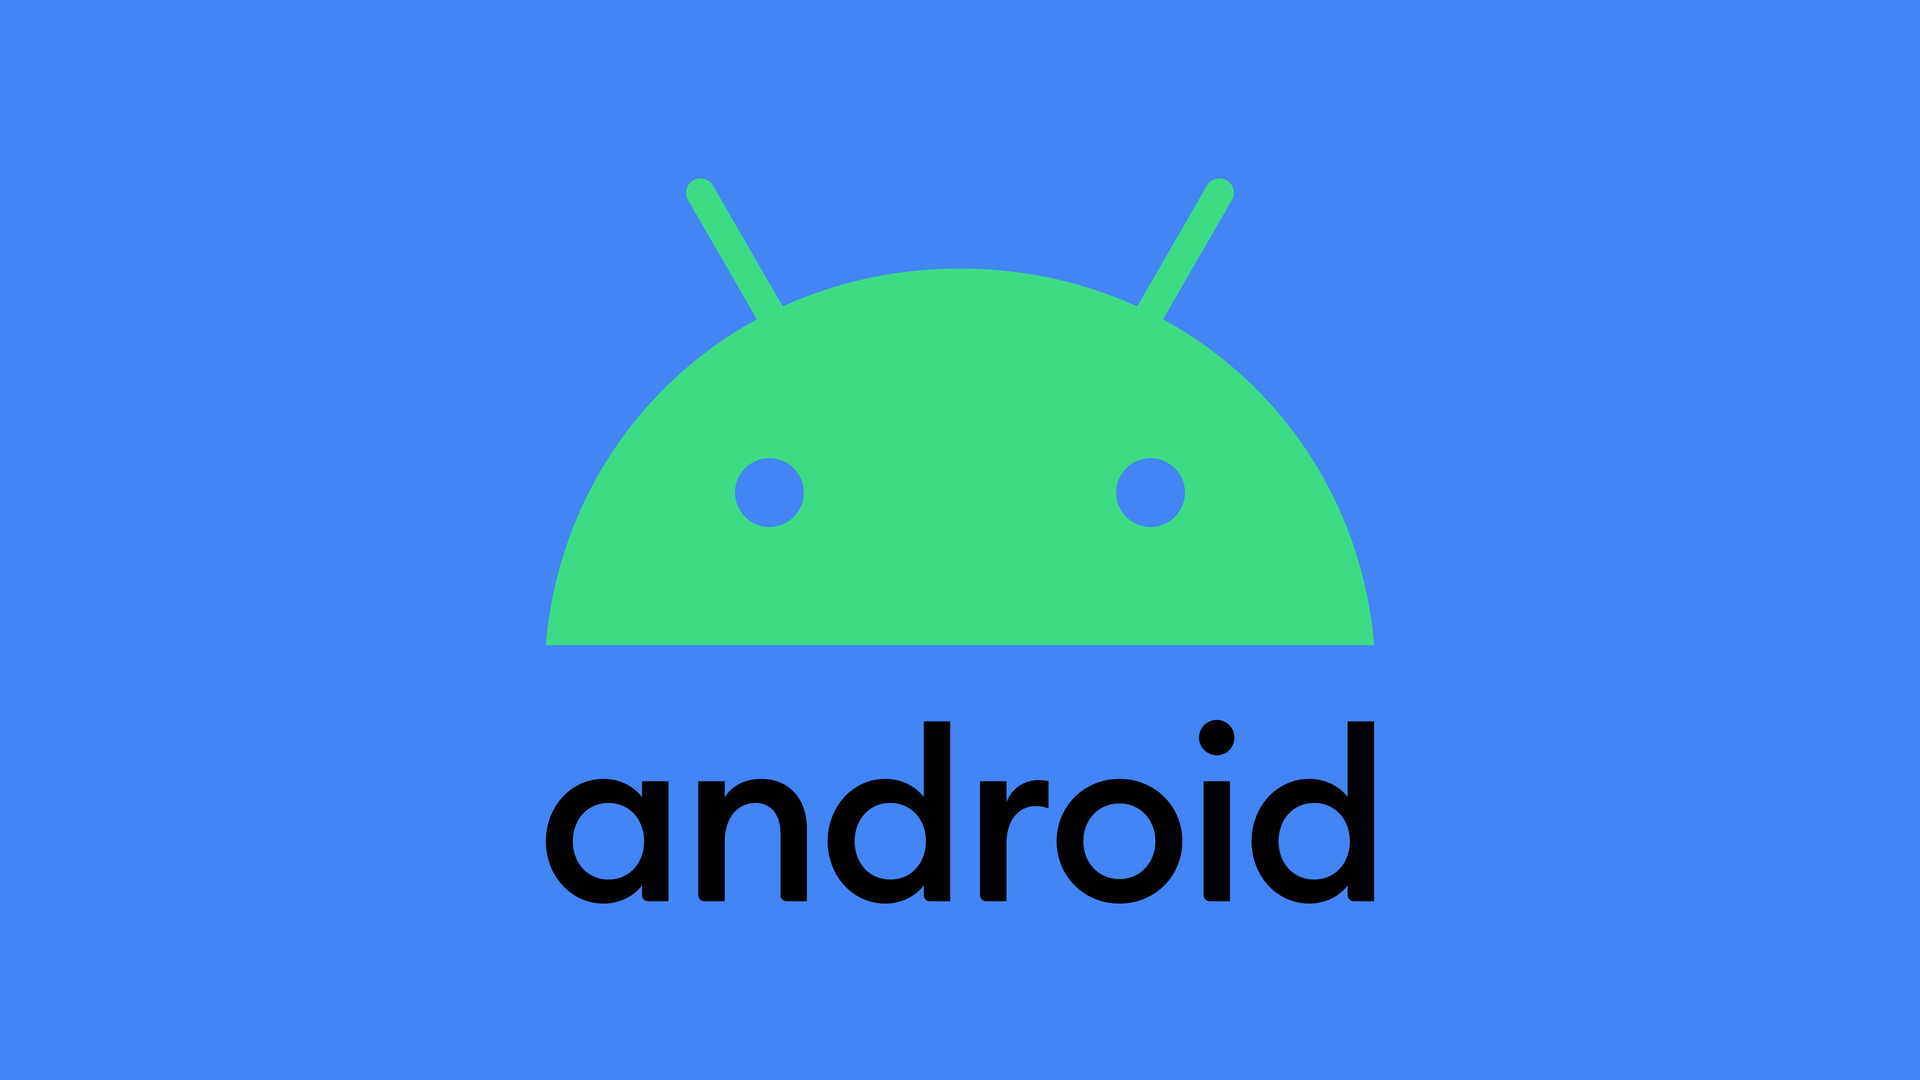 Android logo 2019 blue background